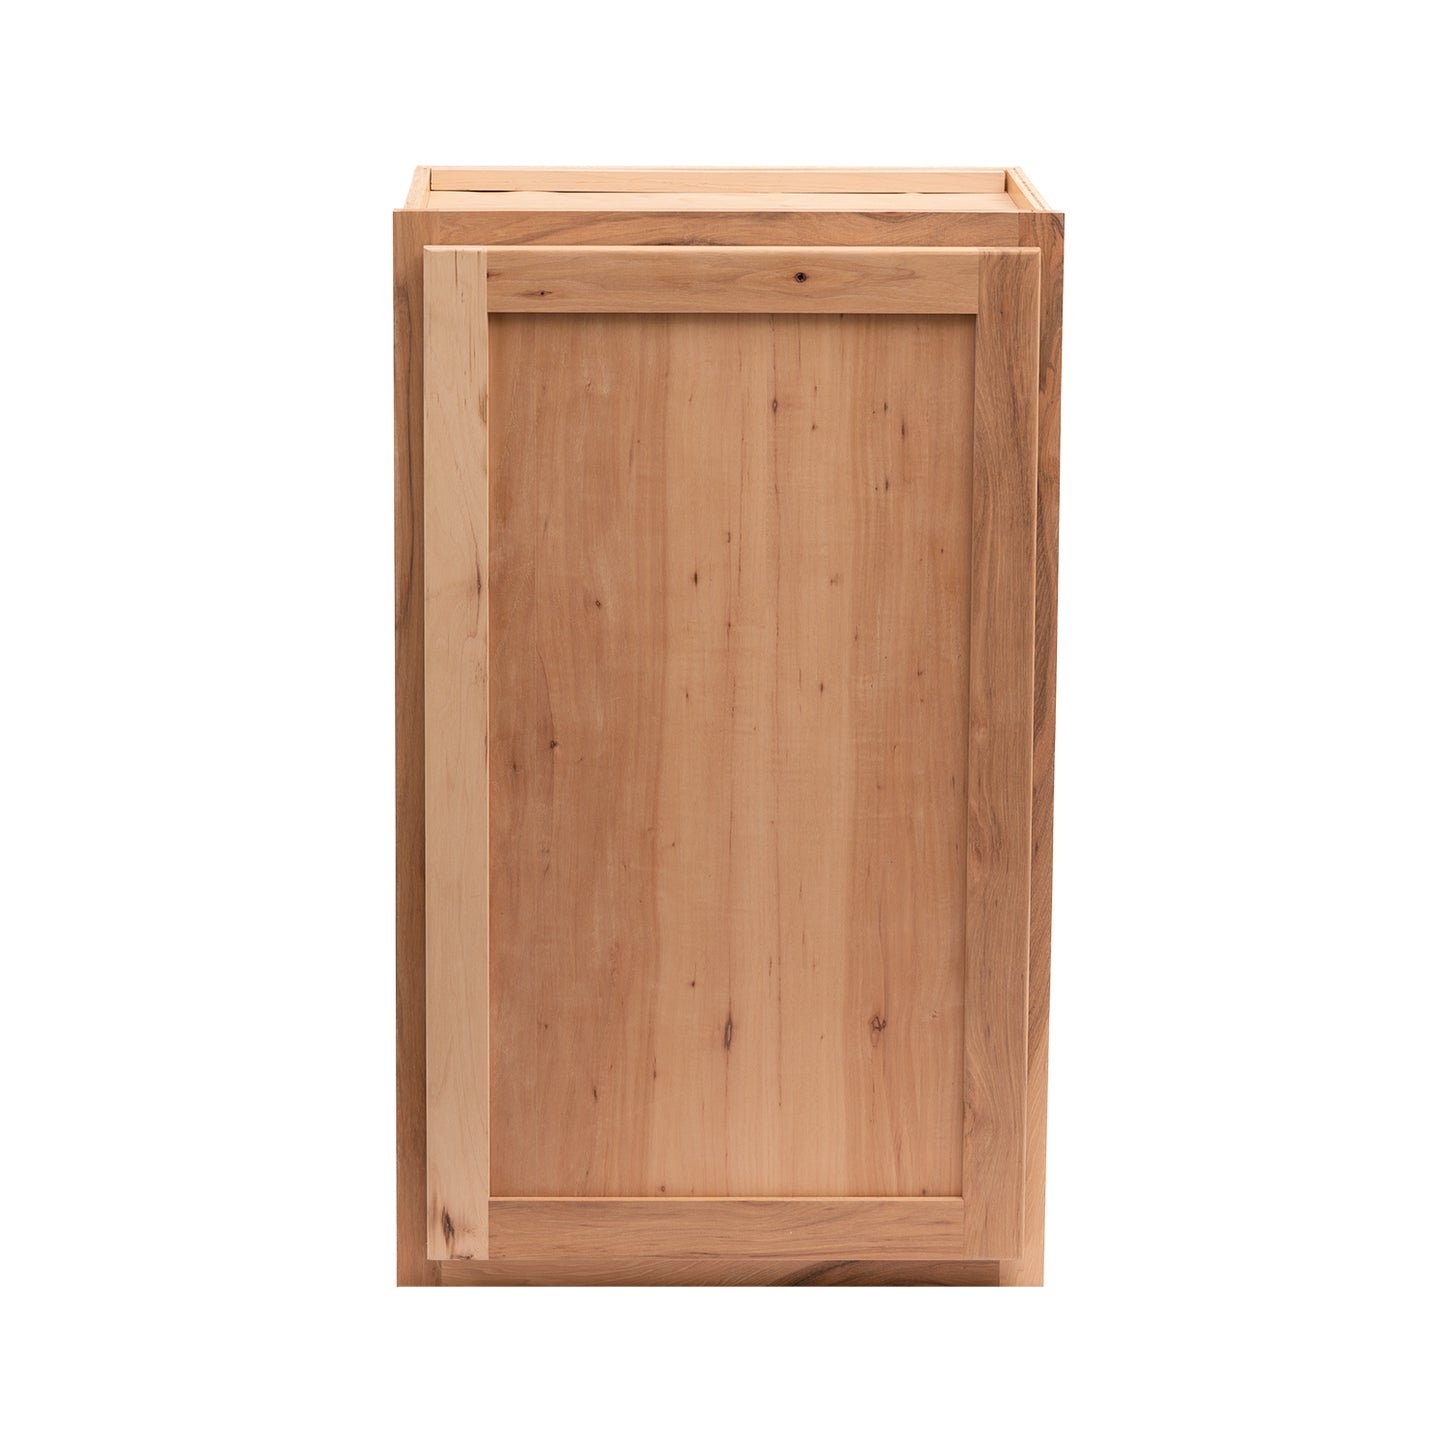 Quicklock RTA - Winding River Collection - Raw Hickory 12"Wx30"Hx12"D Wall Cabinet